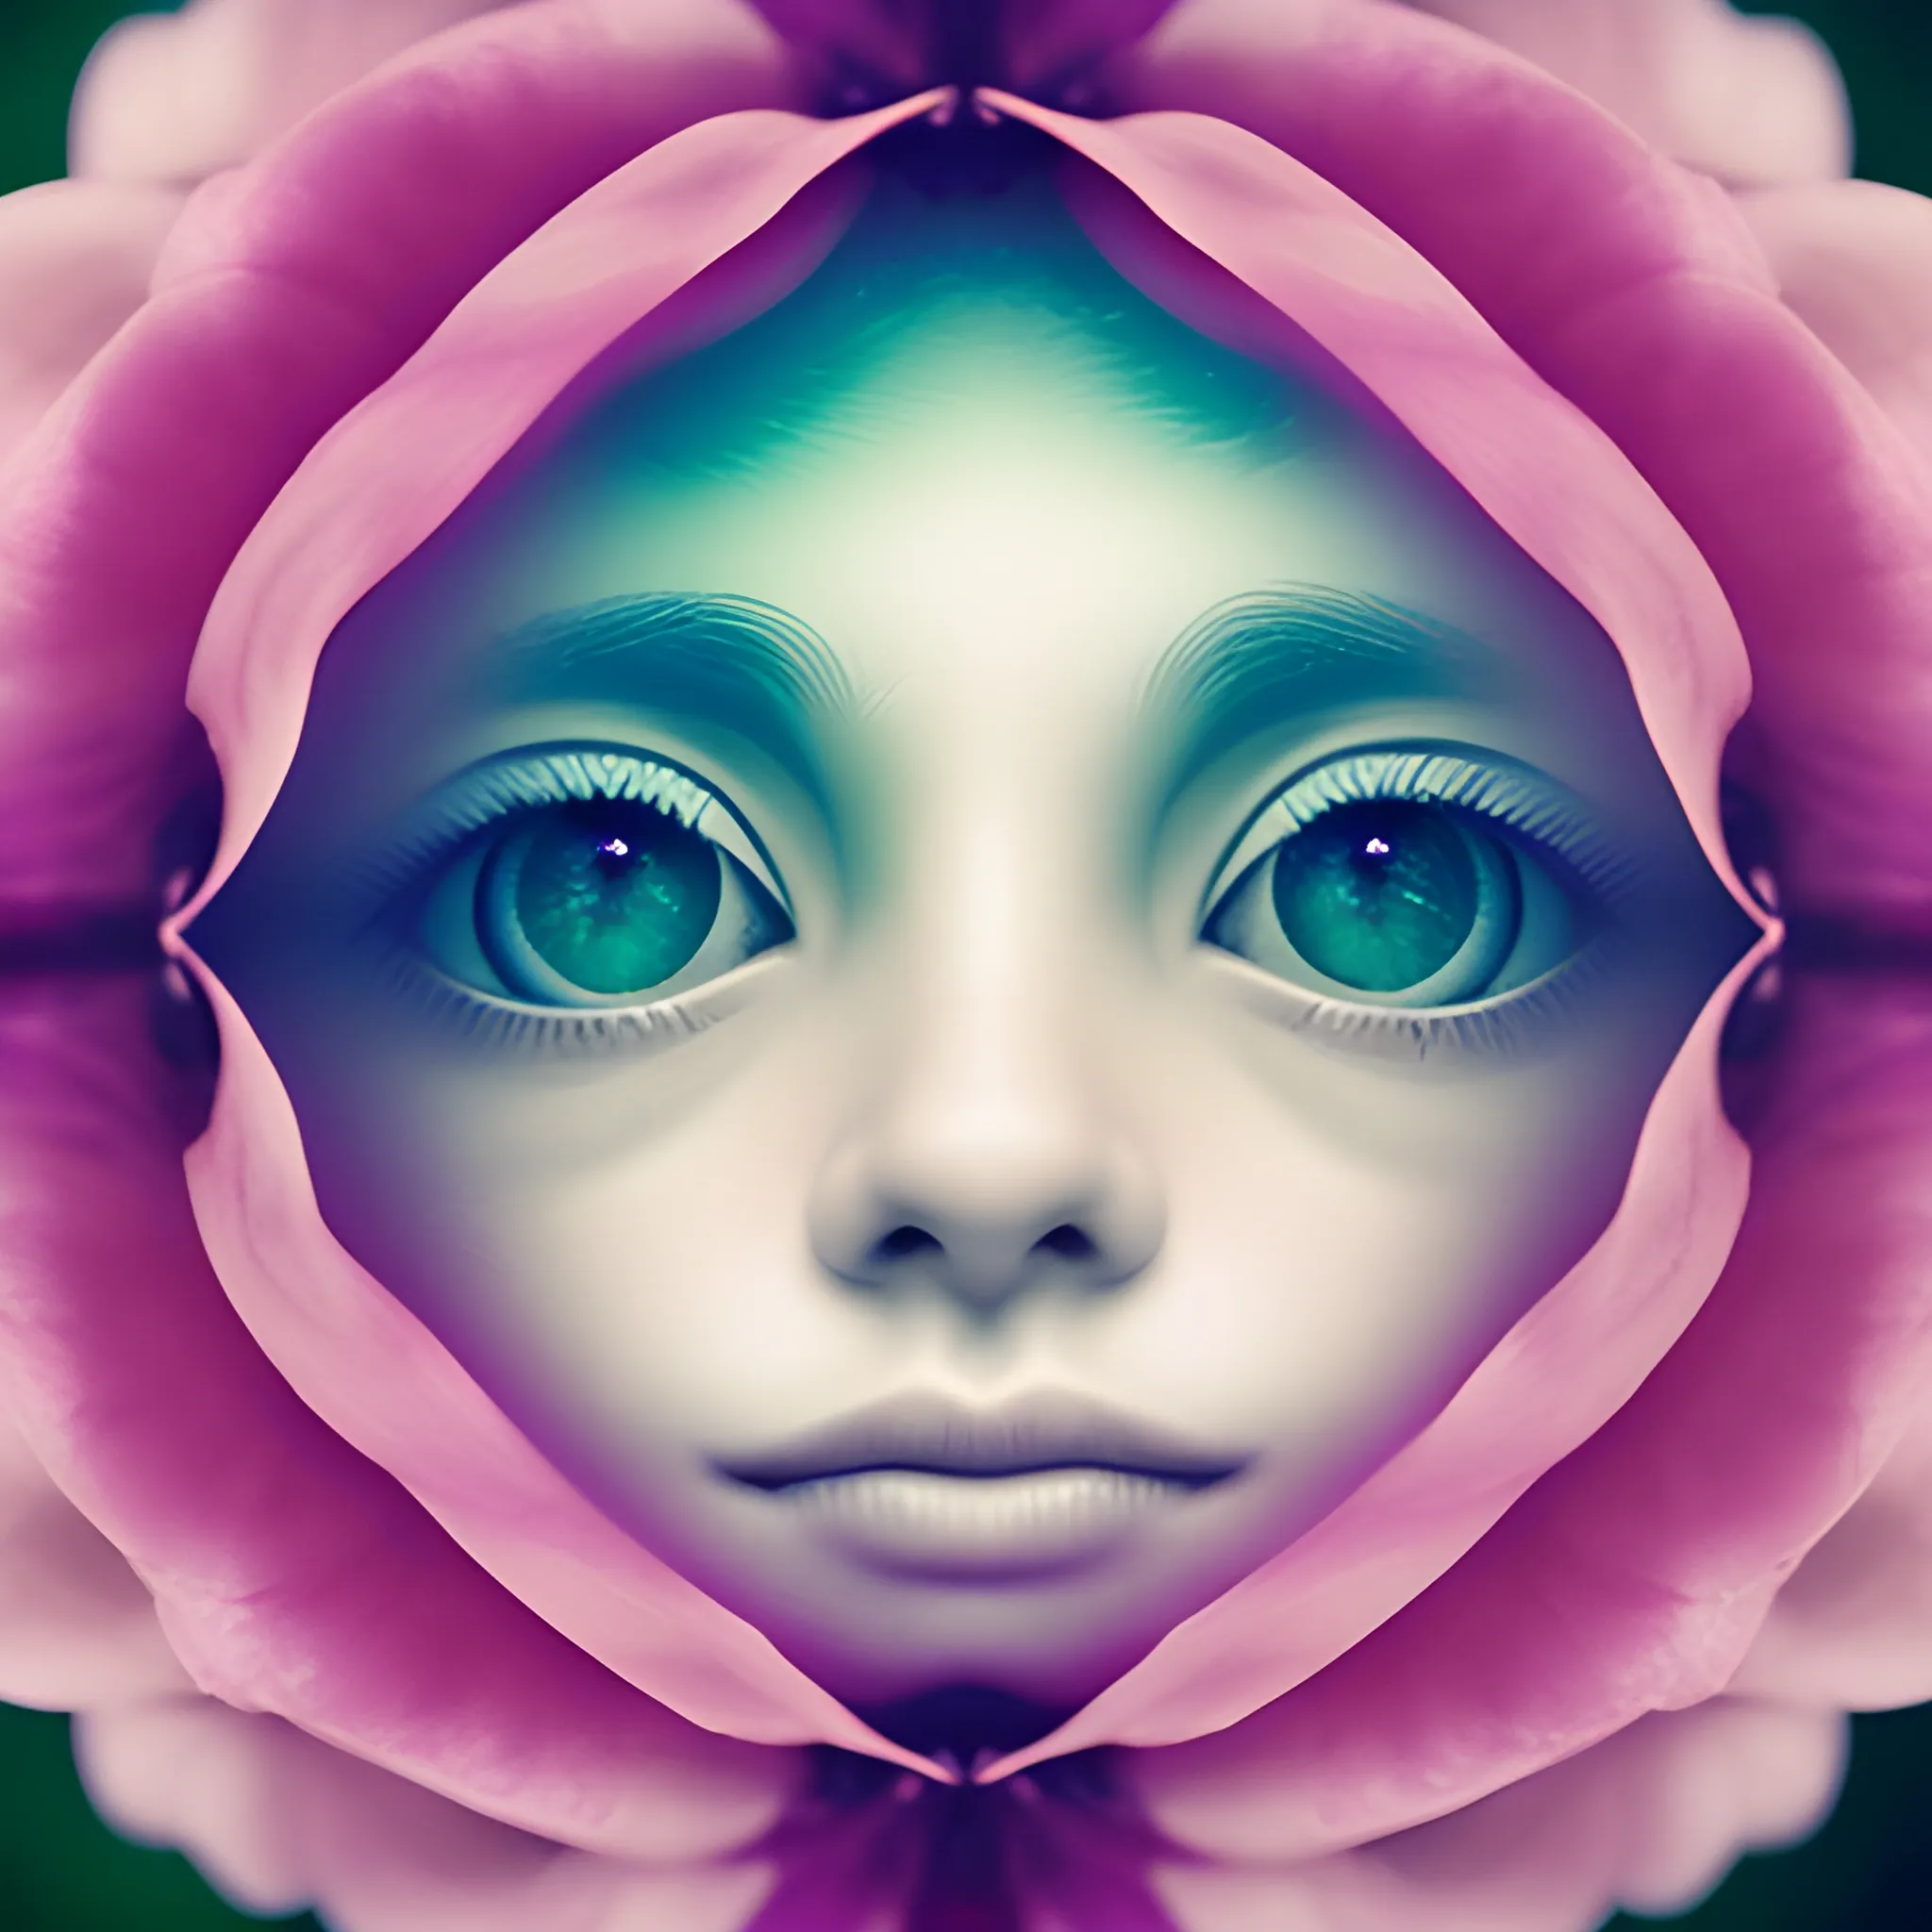 a dreamy flower with human eyes inside on its petals